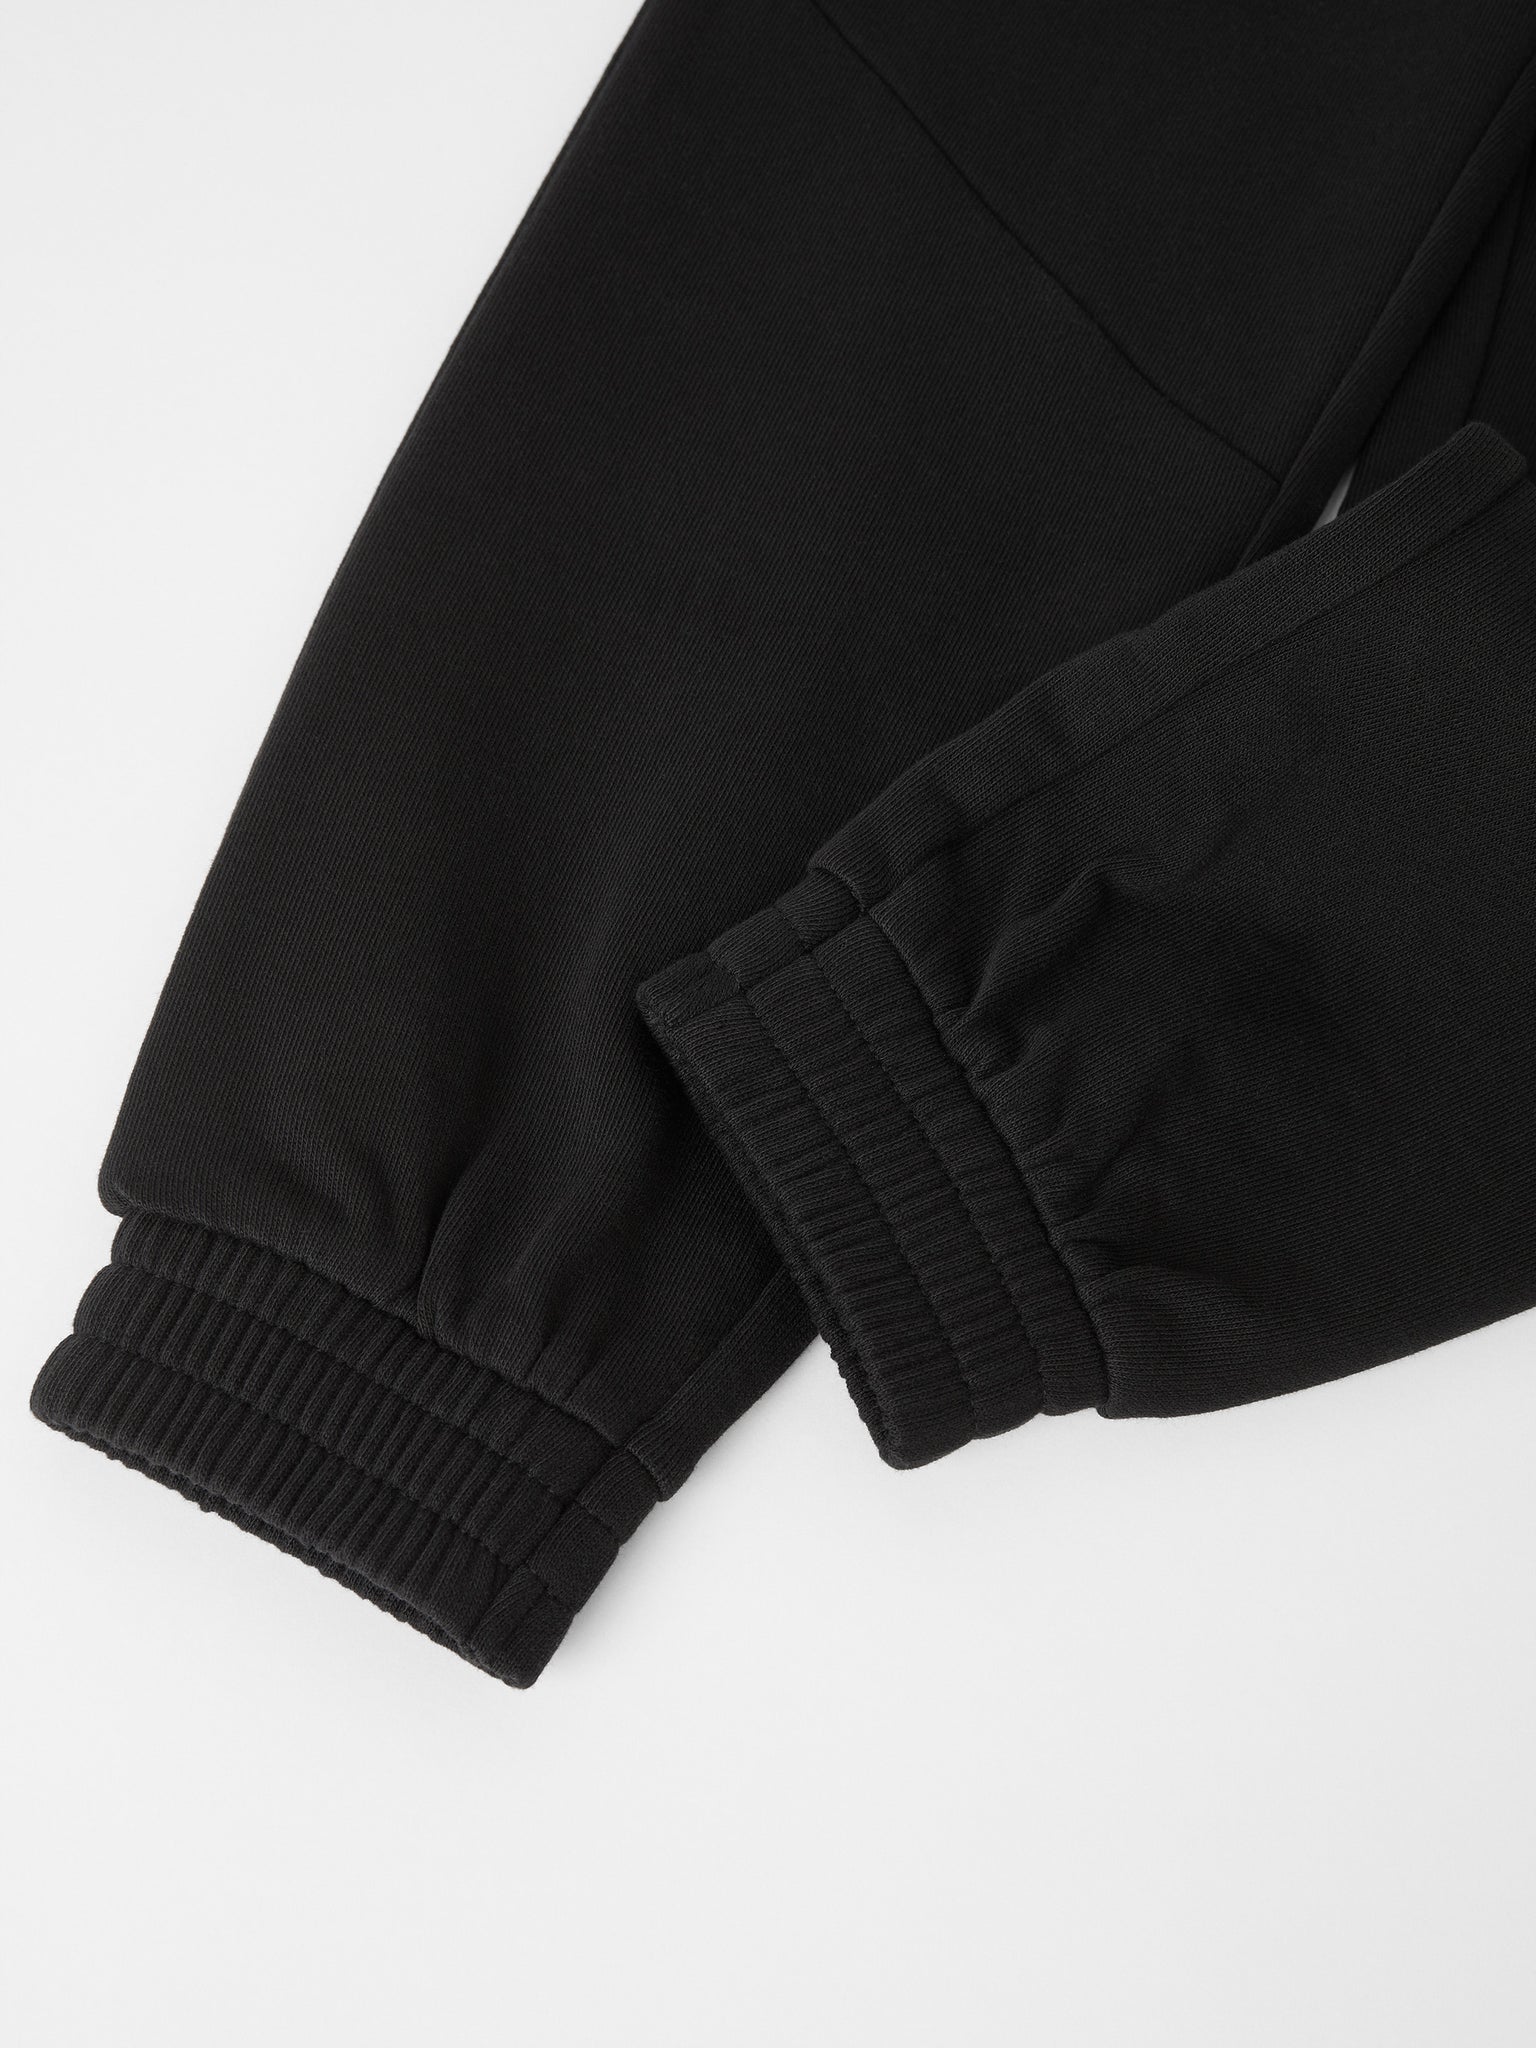 Organic Cotton Kids Black Joggers from the Polarn O. Pyret kids collection. Made using 100% GOTS Organic Cotton